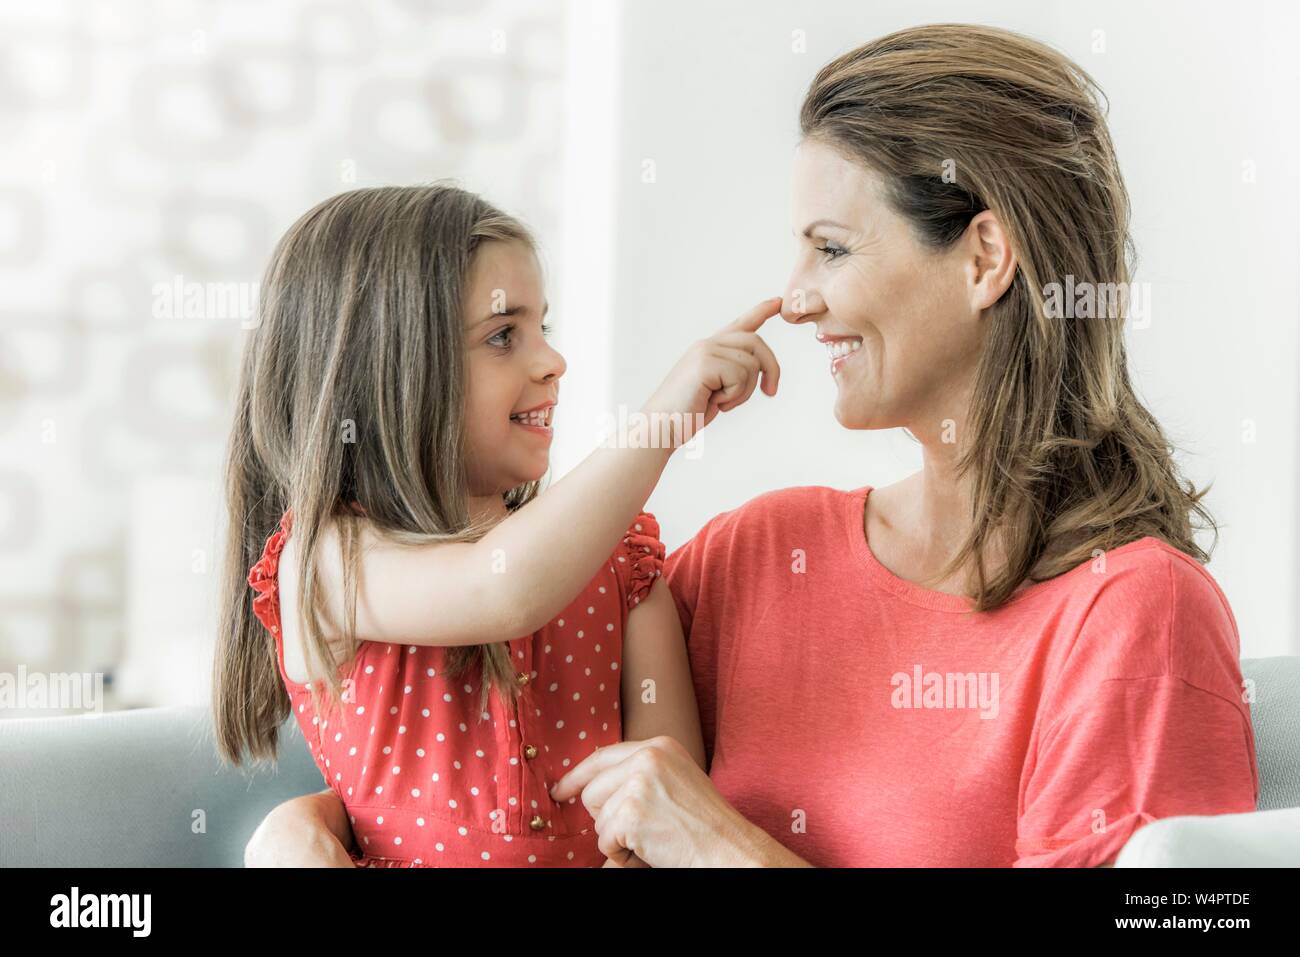 Mother and daughter sit on the couch together and look at each other, daughter grabs mother's nose, smile, Germany Stock Photo